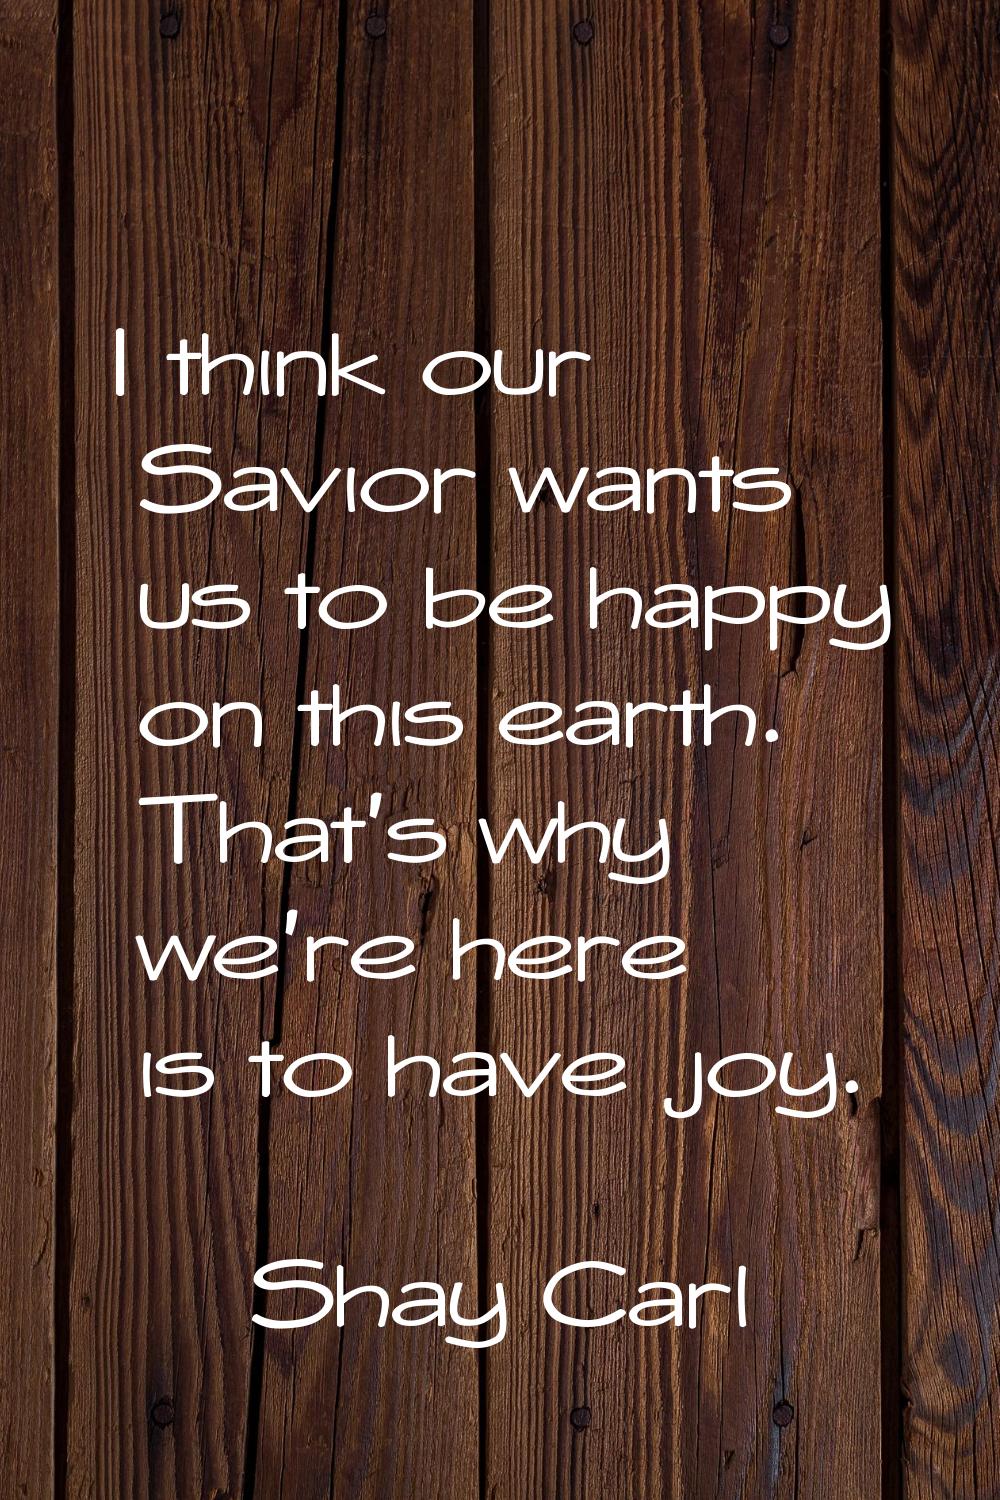 I think our Savior wants us to be happy on this earth. That's why we're here is to have joy.